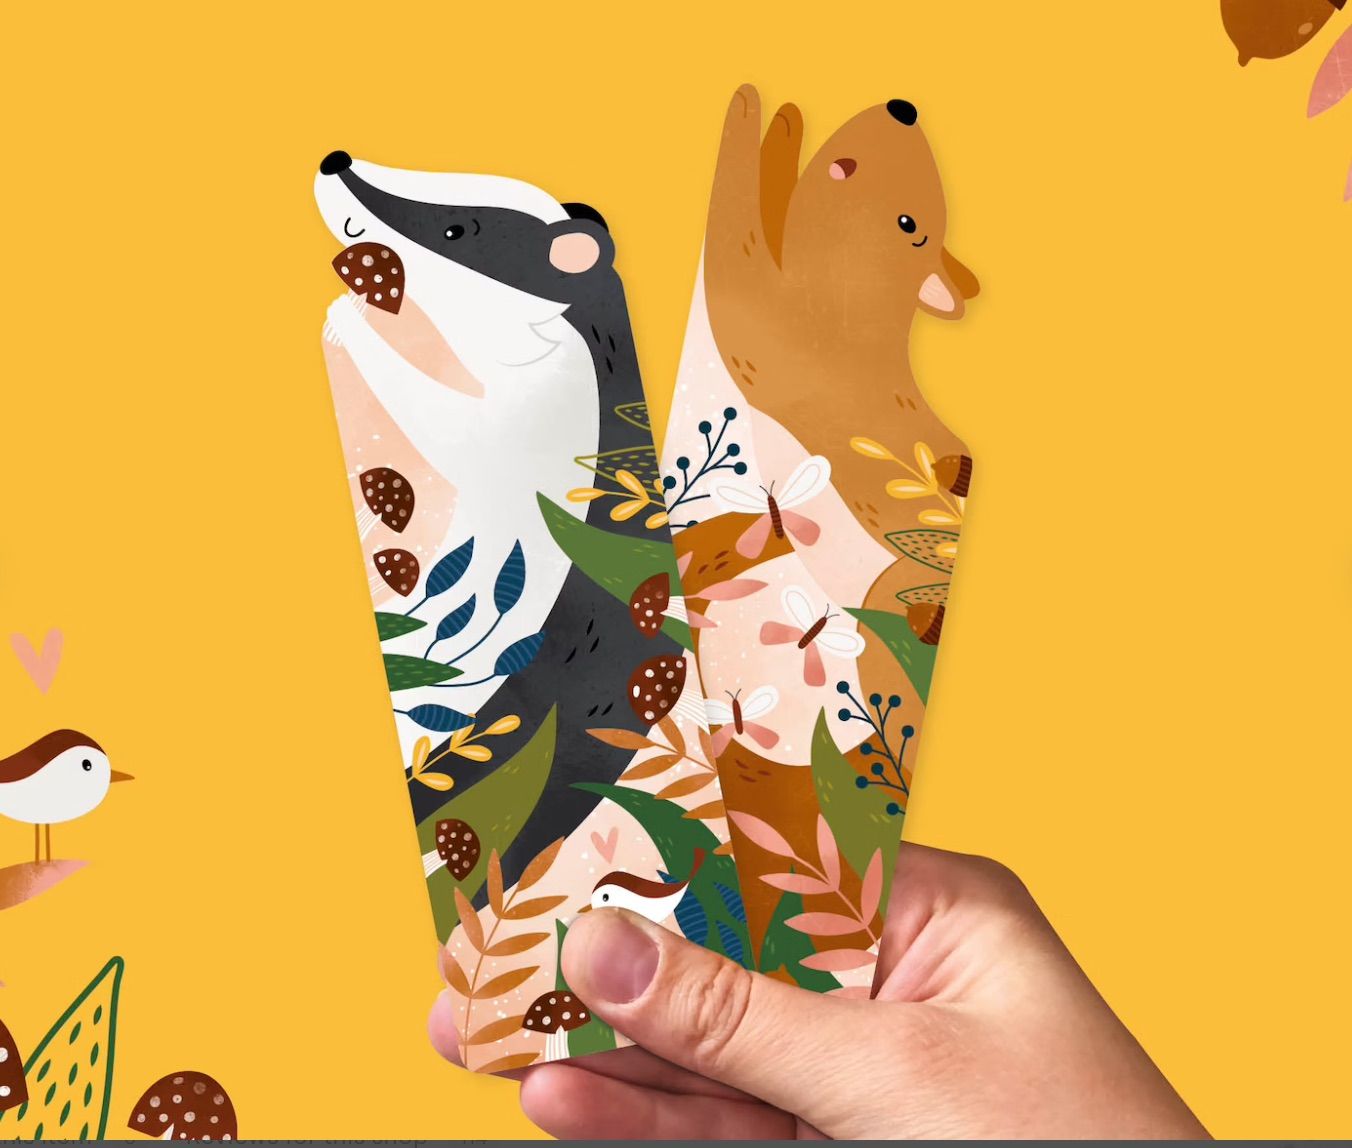 Squirrel and badger bookmarks being held by a white hand on a yellow background. 